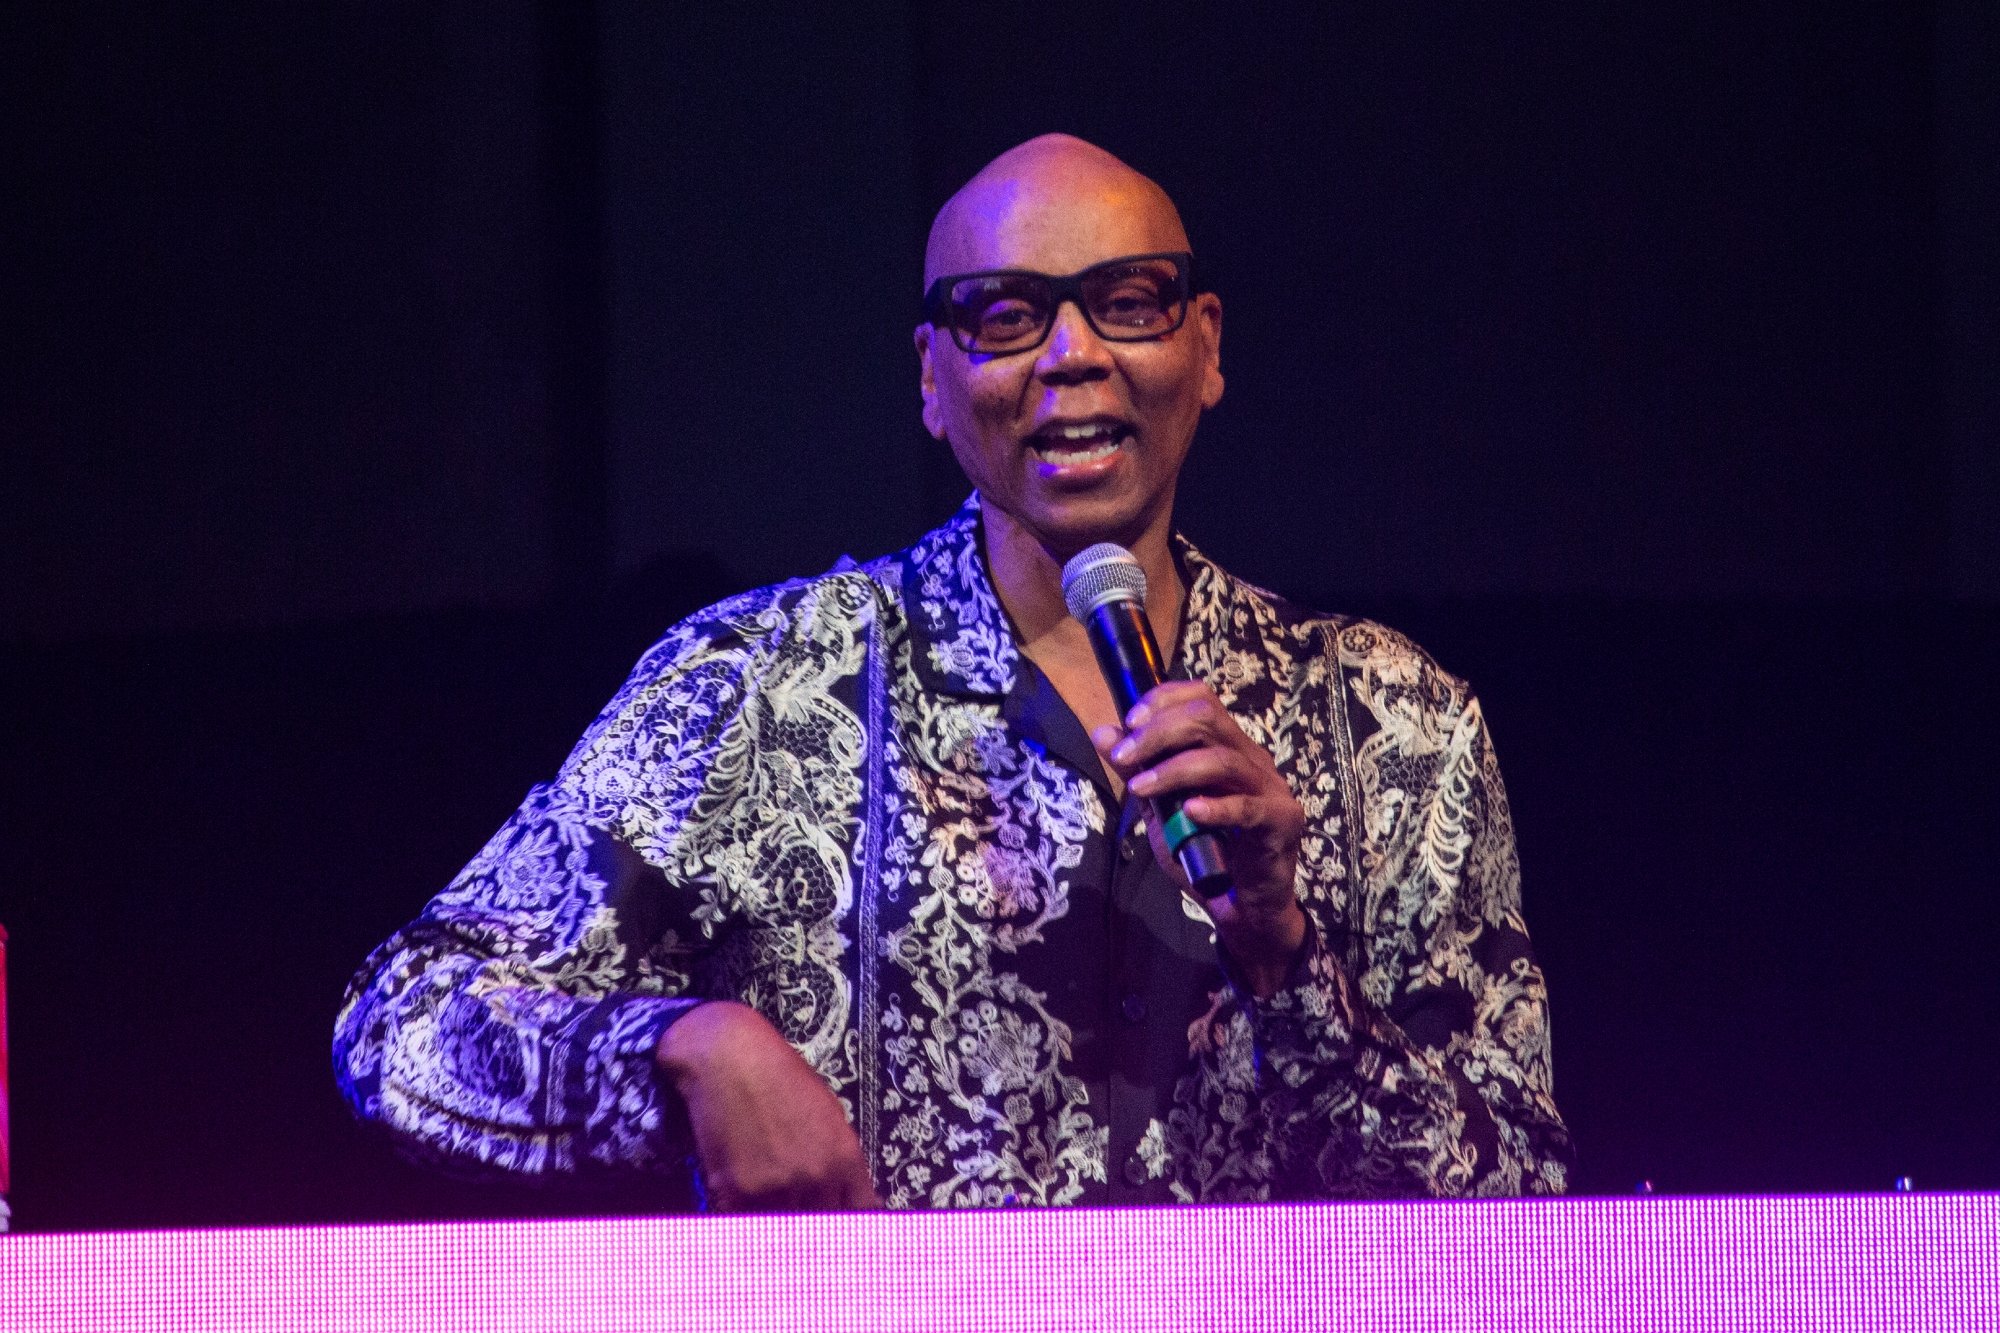 RuPaul, who owns multiple cars, speaking into a microphone wearing a black and white collared shirt